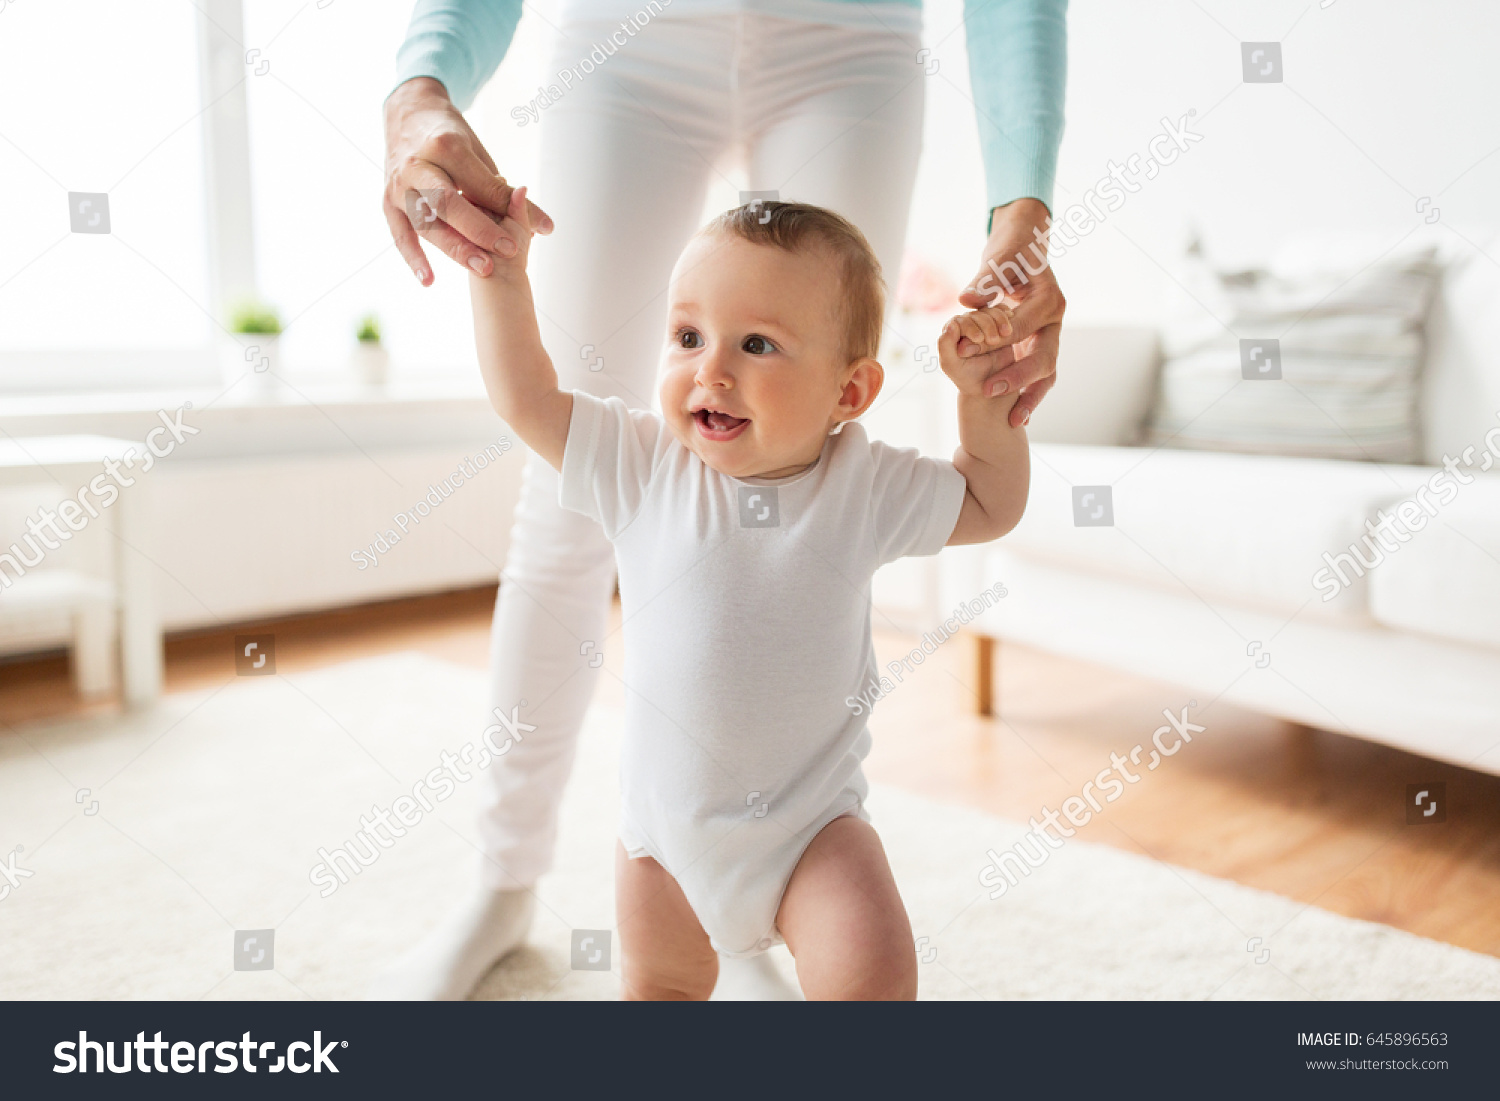 family, child, childhood and parenthood concept - happy little baby learning to walk with mother help at home #645896563